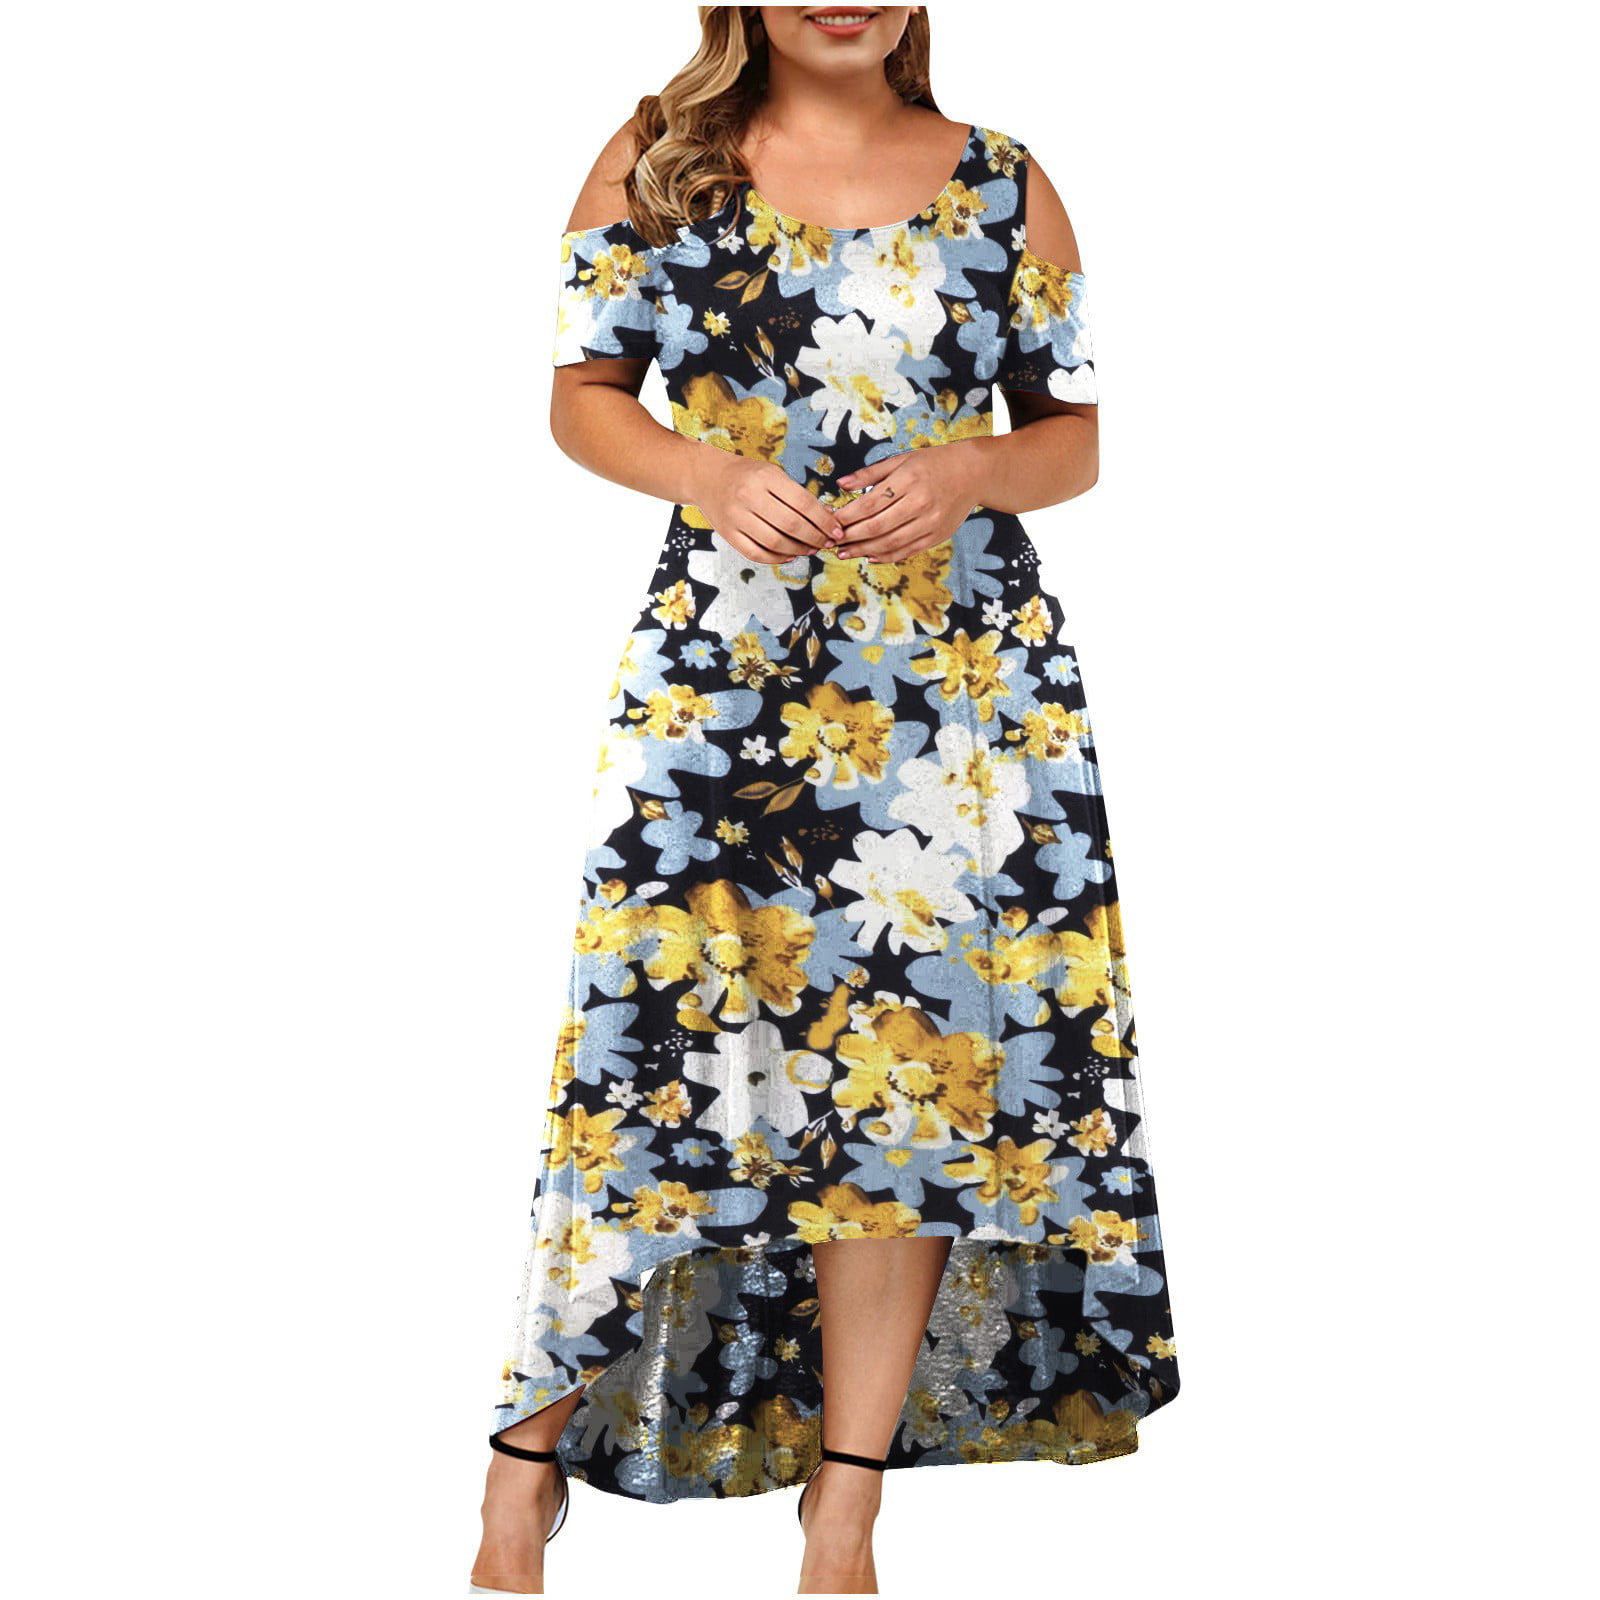 Details about   Tarditional Women Navy Blue Ethnic Motifs Printed Fit And Flare New Dress 